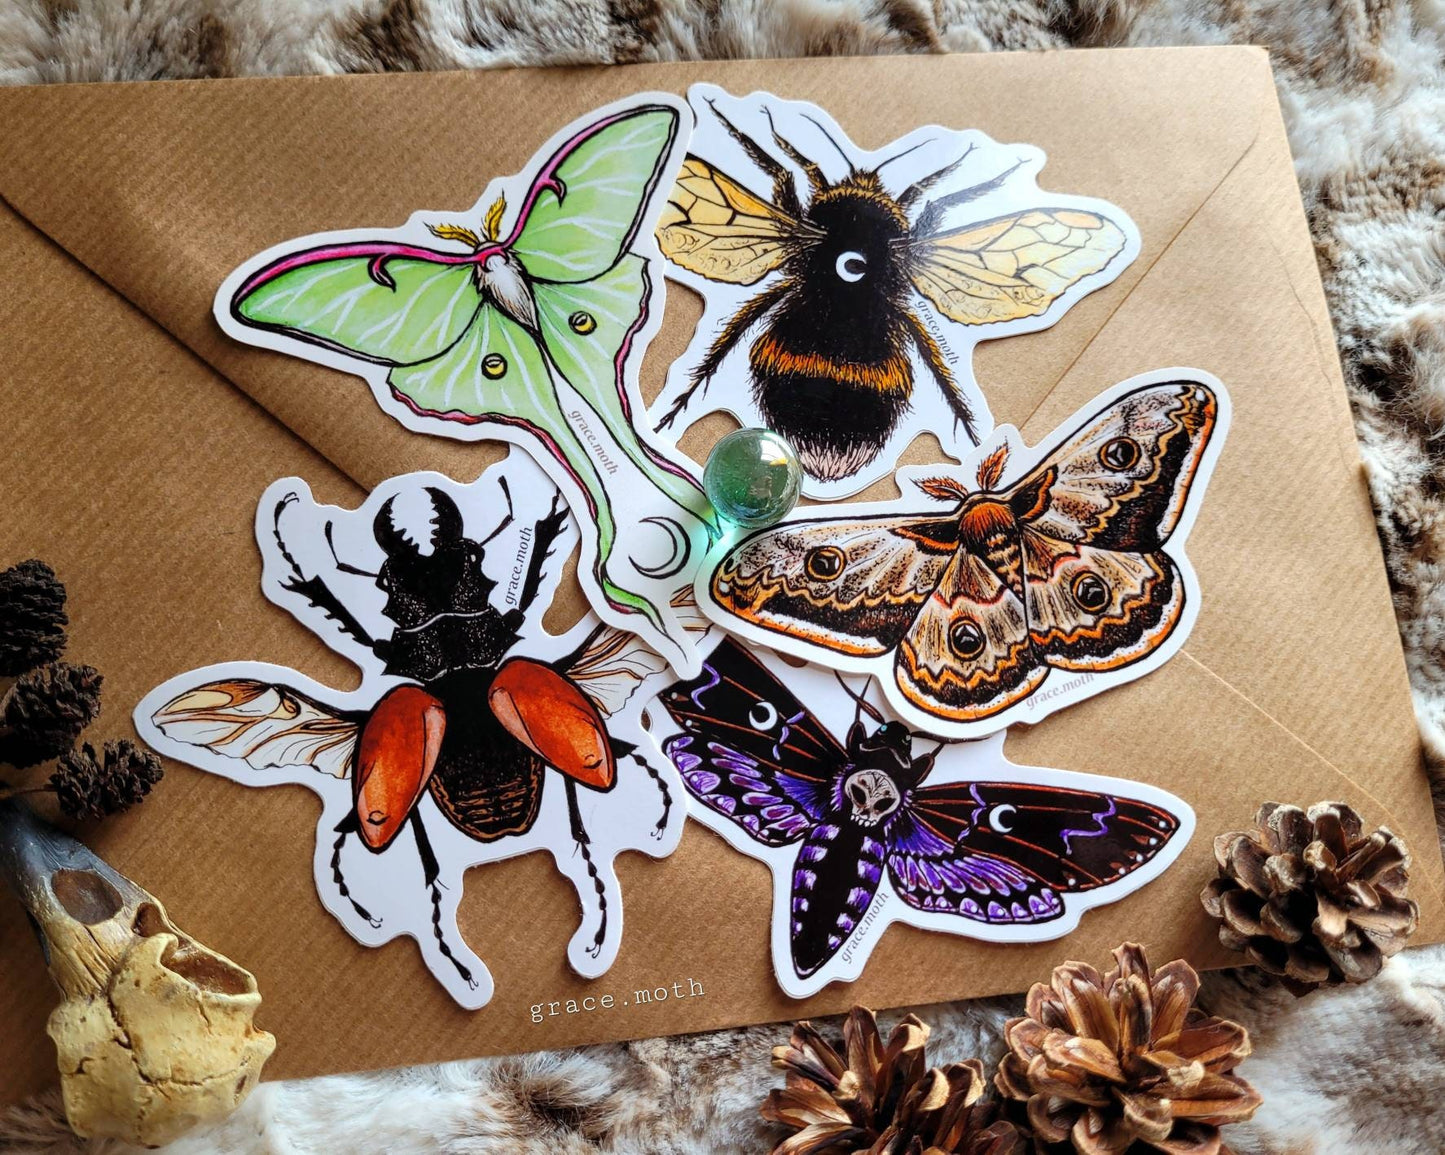 Magical Insects - Vinyl Sticker Bundle 10cm - Illustrated by Grace moth. Witchy, magic, moths, luna moth, death hawk, bumble bee, oddities